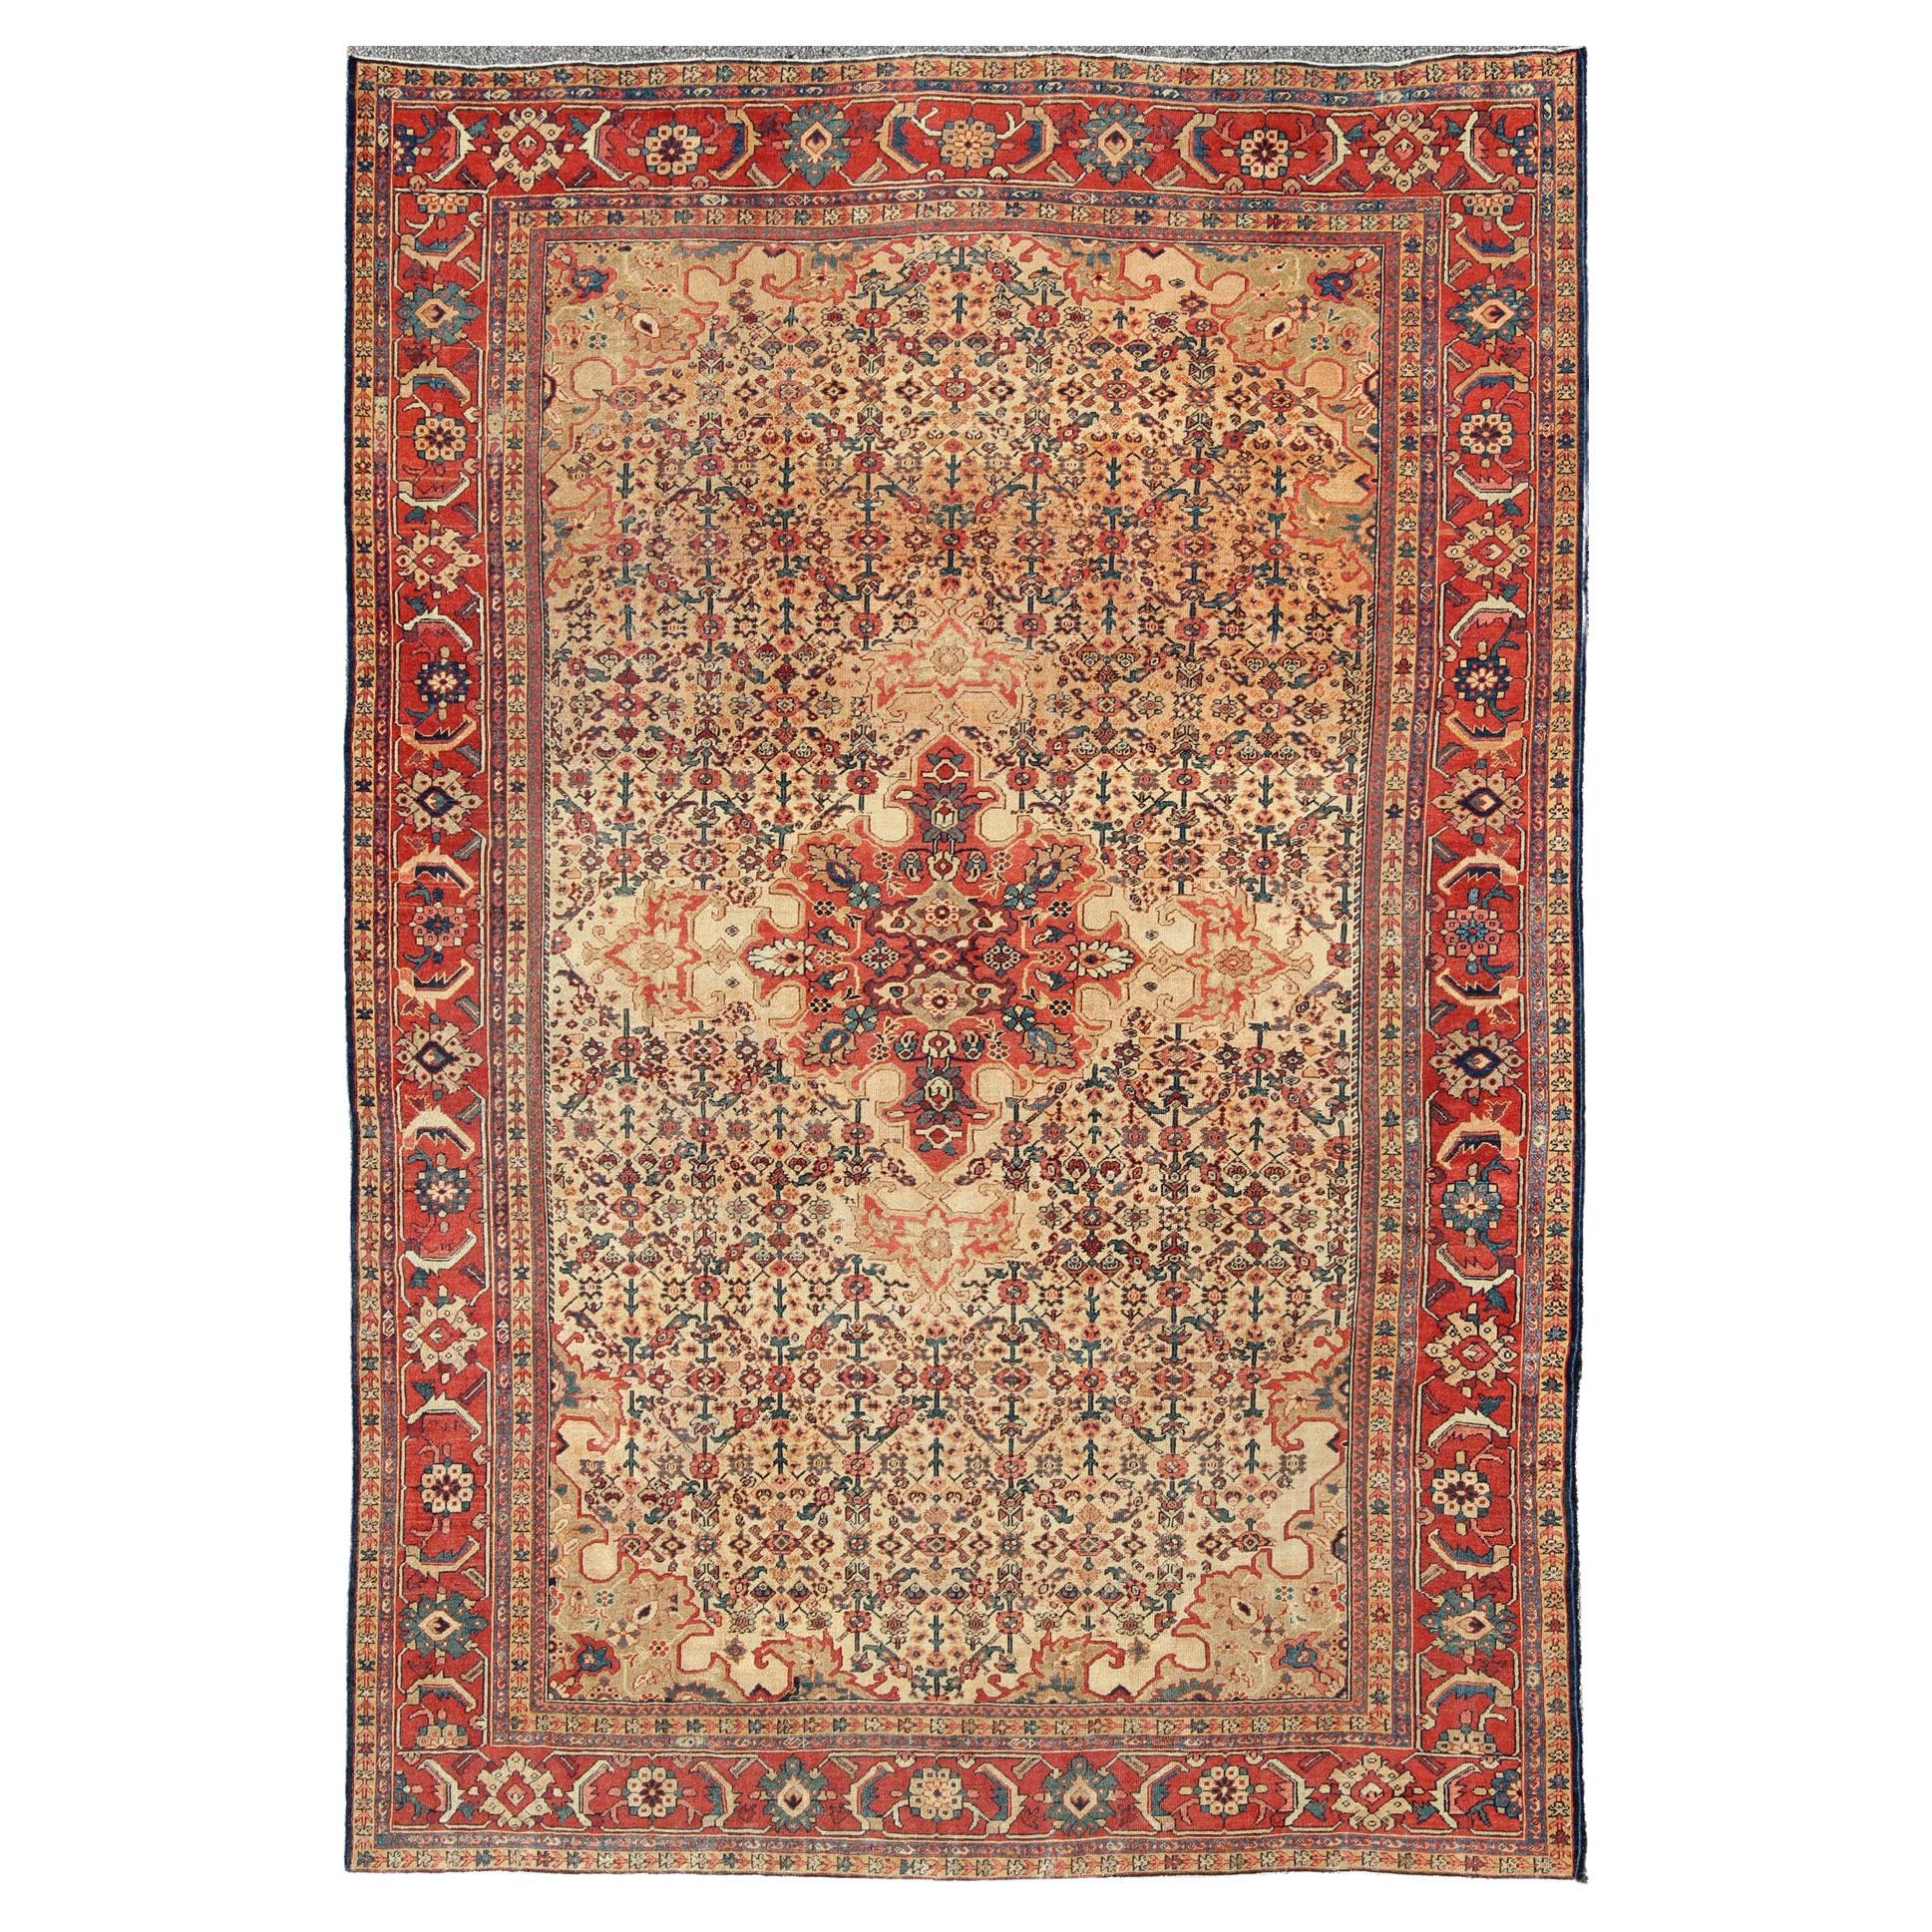 Antique Persian Sultanabad Rug in Herati Design with Ivory, Red and Green